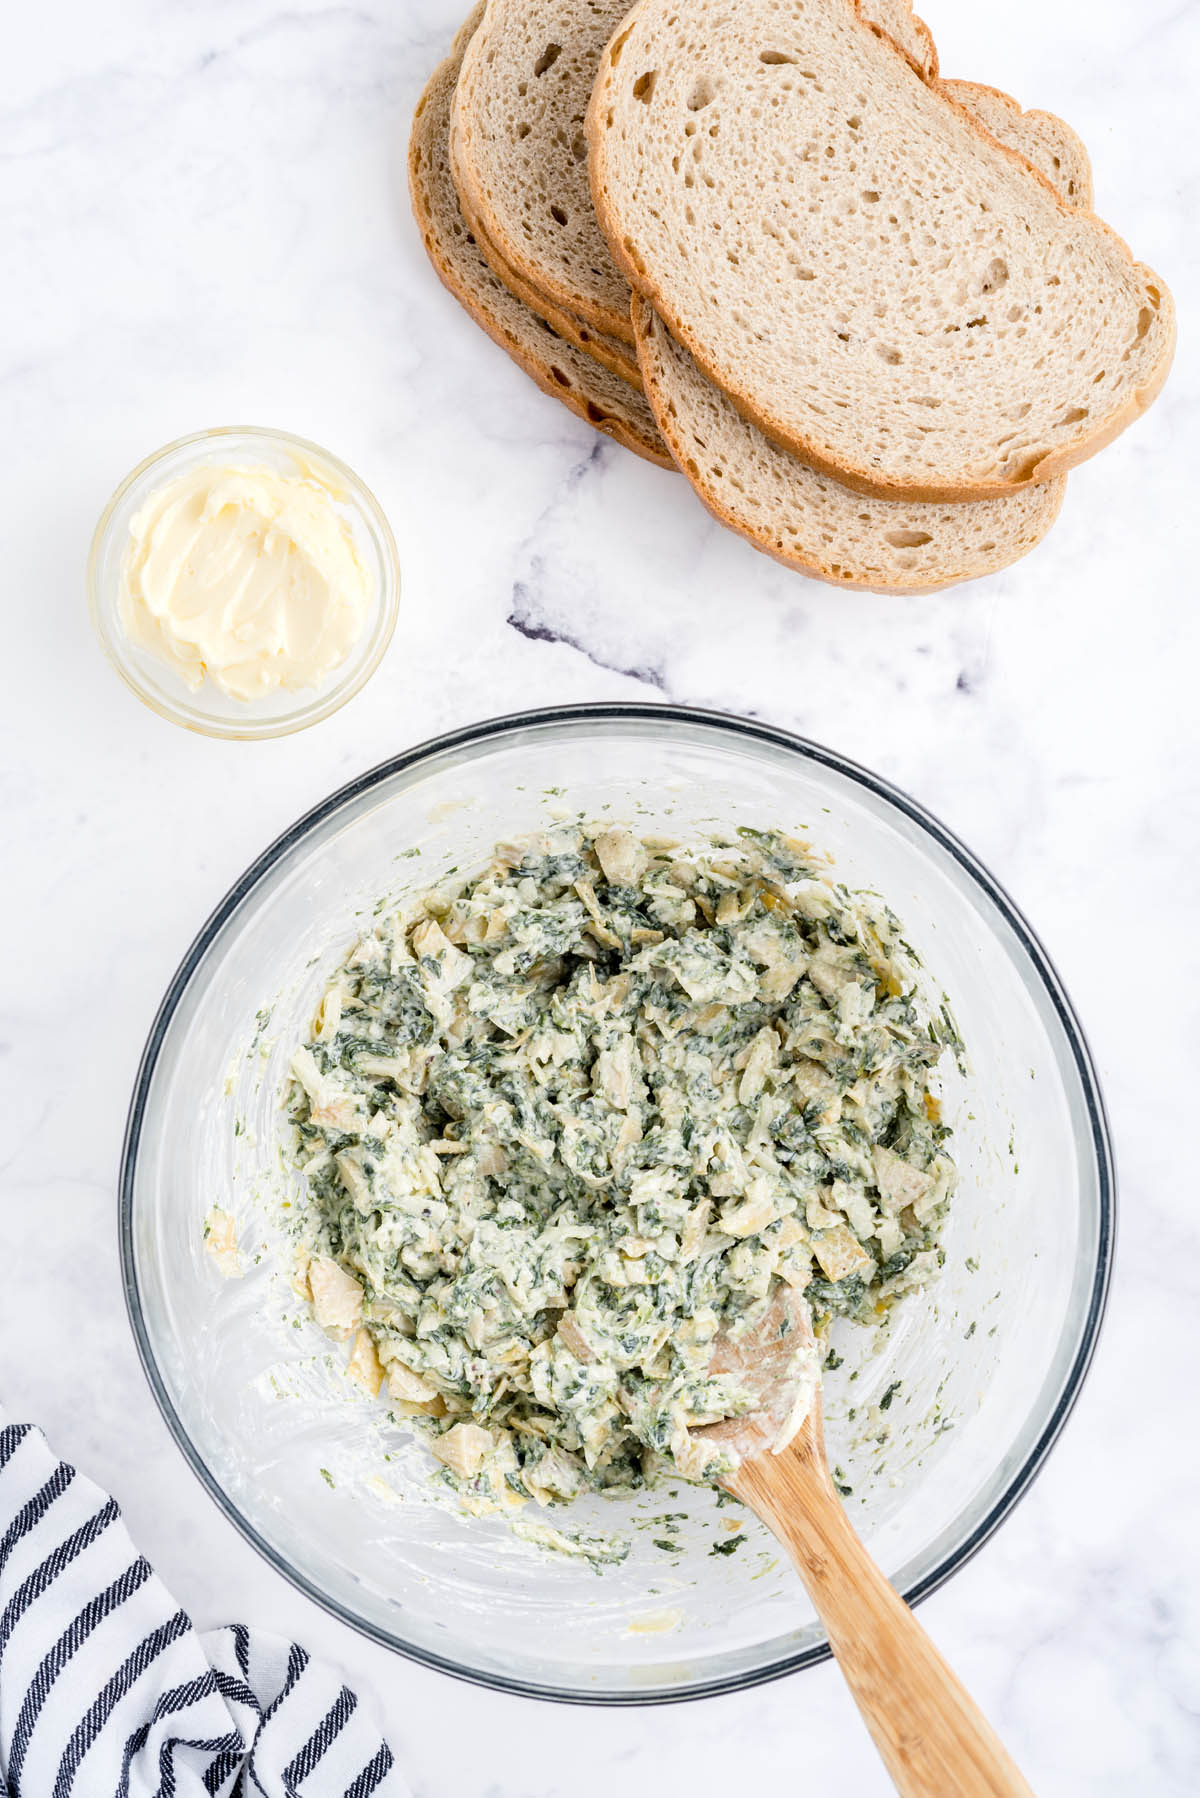 Mix together spinach, artichoke hearts, mayonnaise, sour cream, cream cheese, mozzarella cheese, cheddar cheese, parmesan cheese, onion powder, kosher salt, and pepper until well combined.